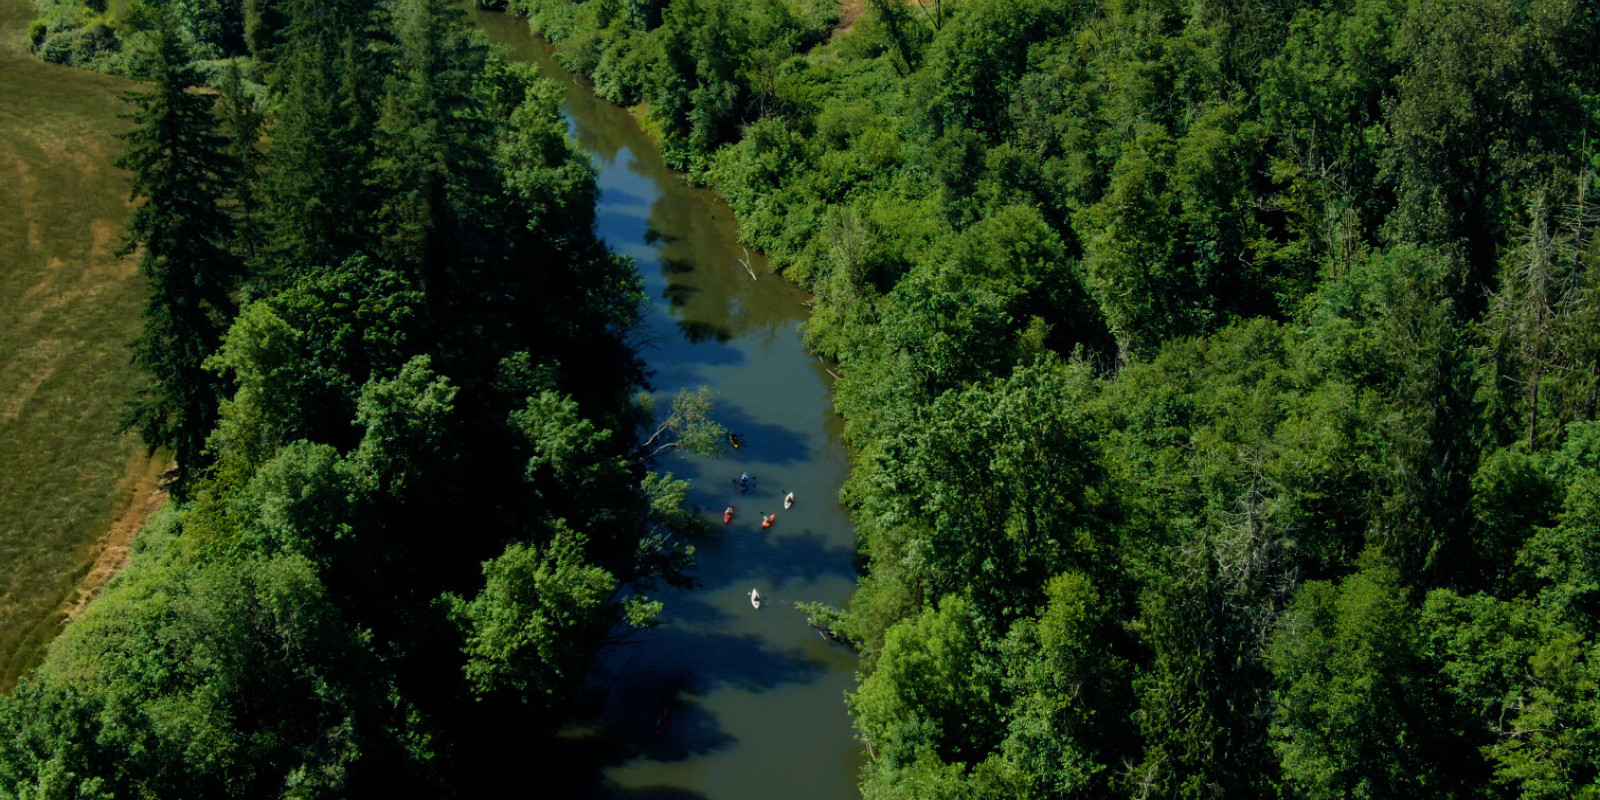 An overhead view of the Tualatin River with people kayaking on it.